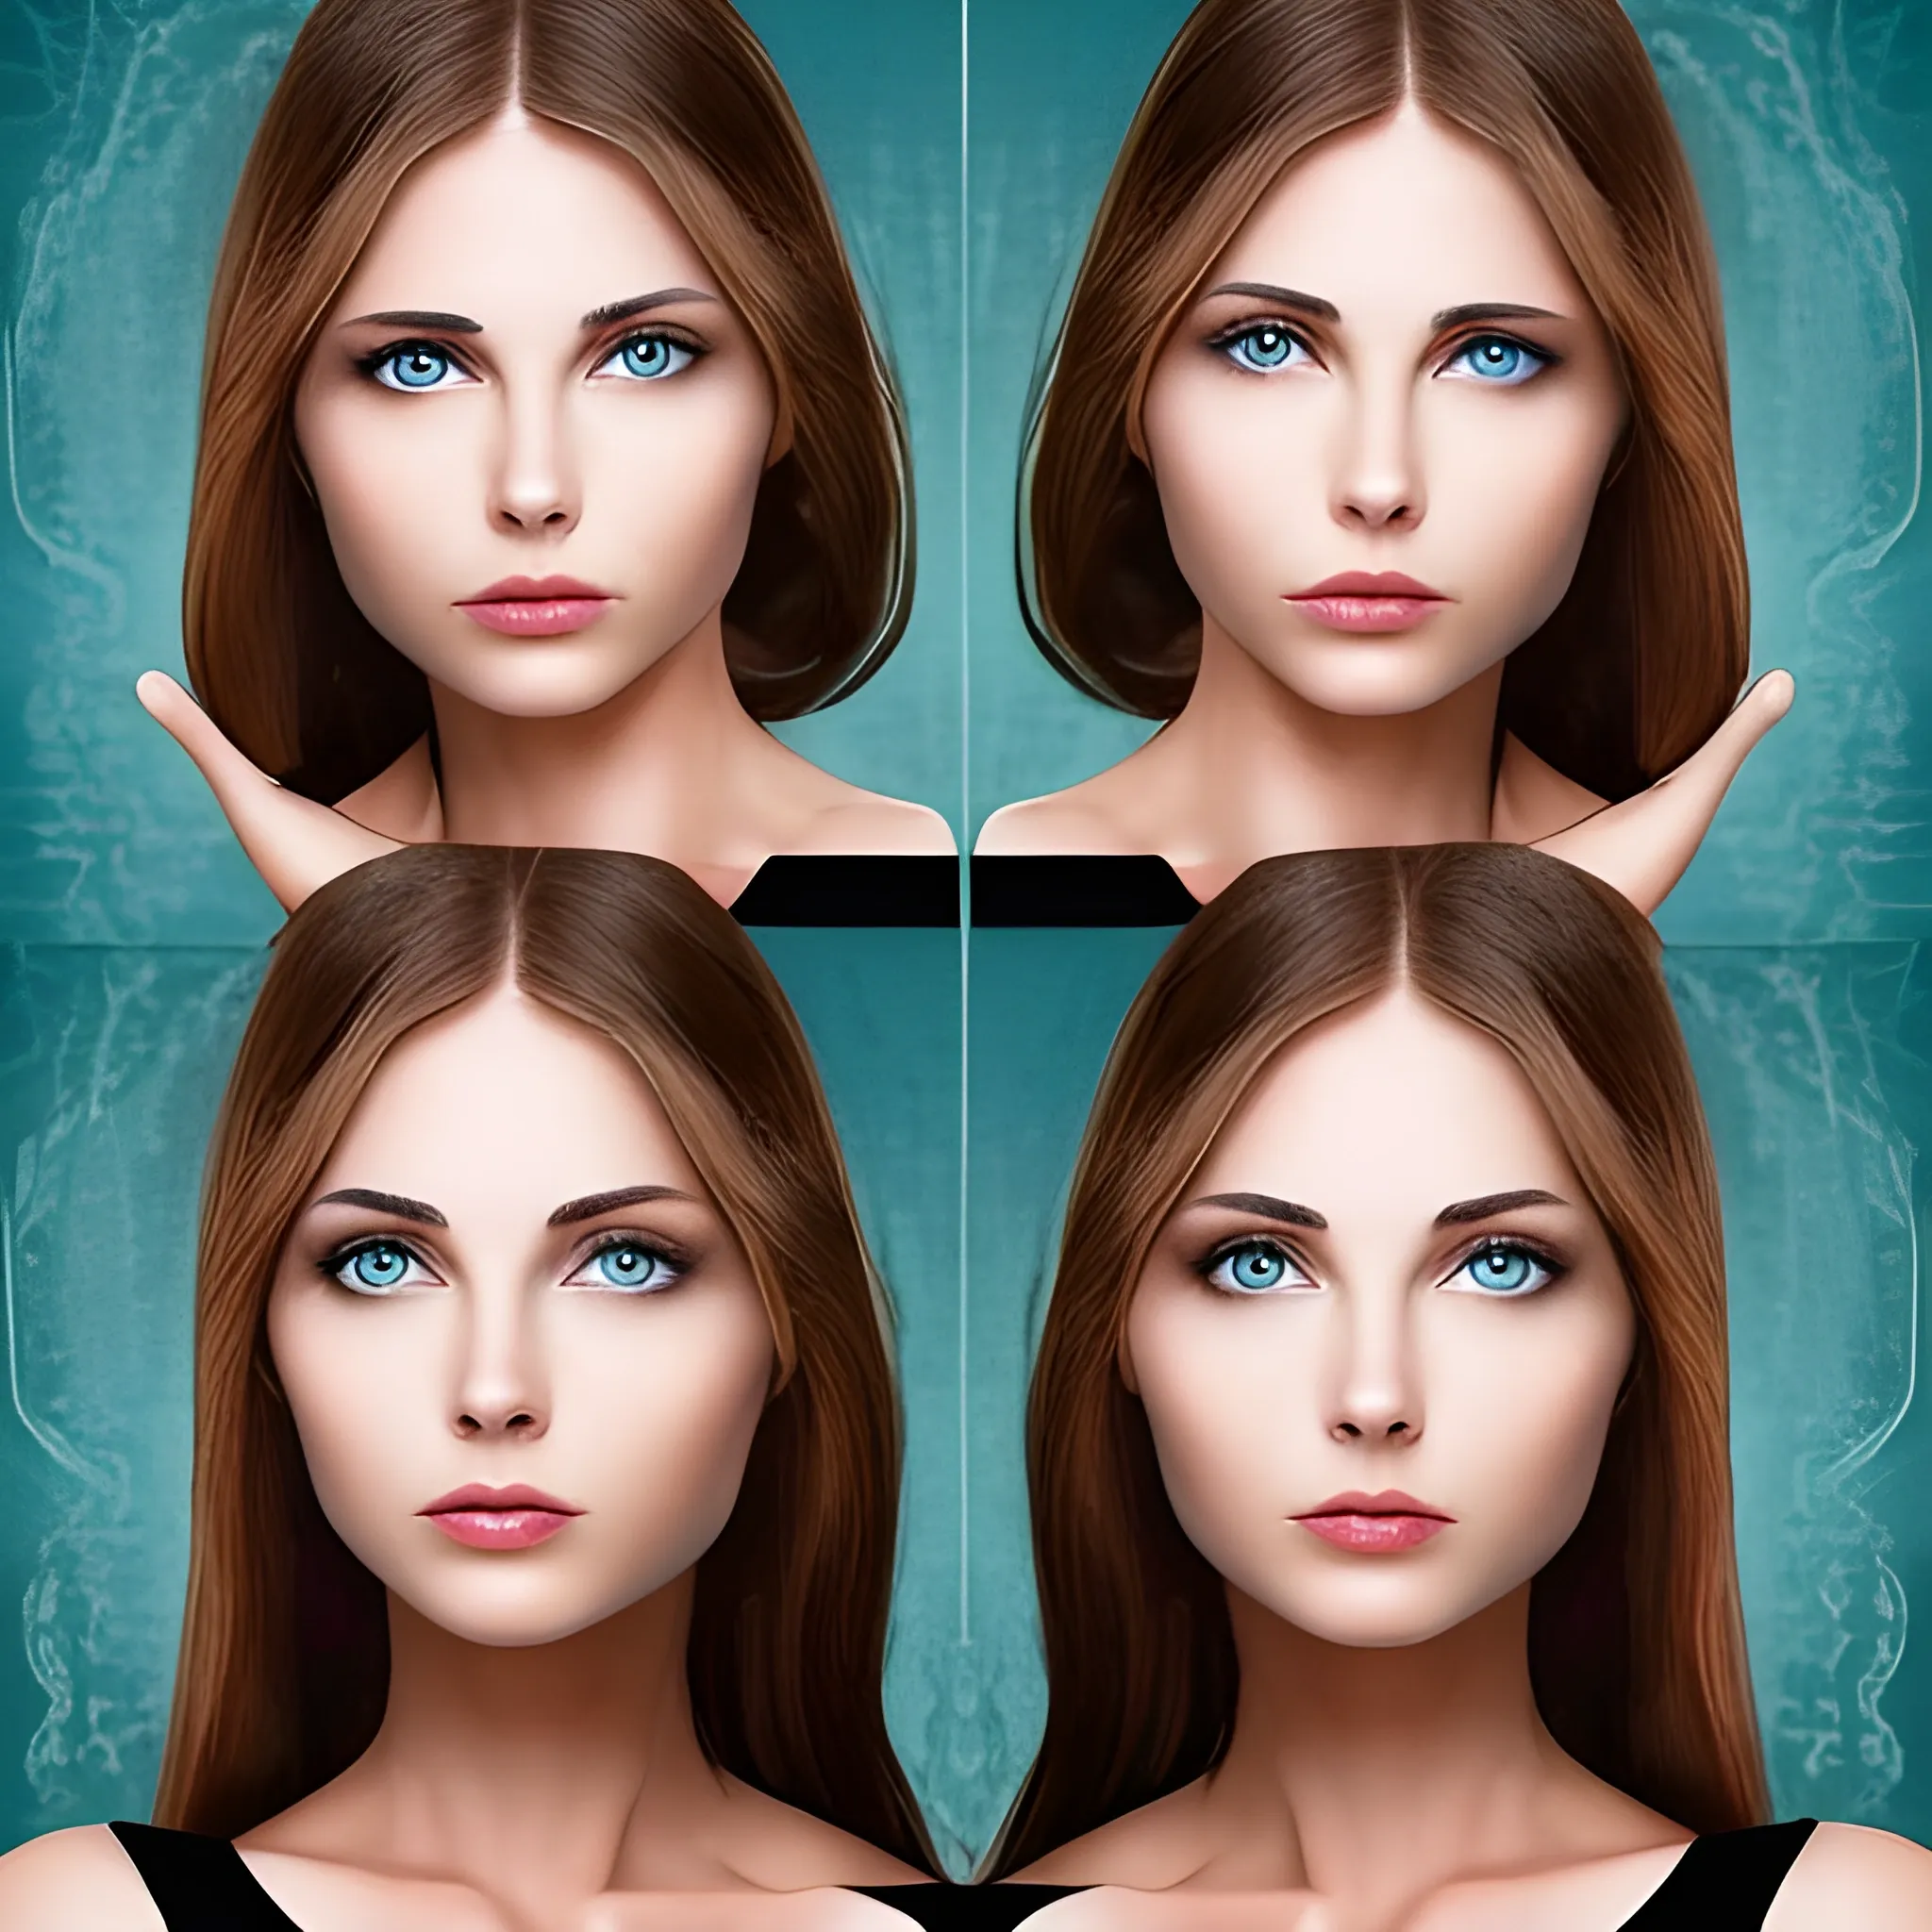 beutiflest woman with multiple faces